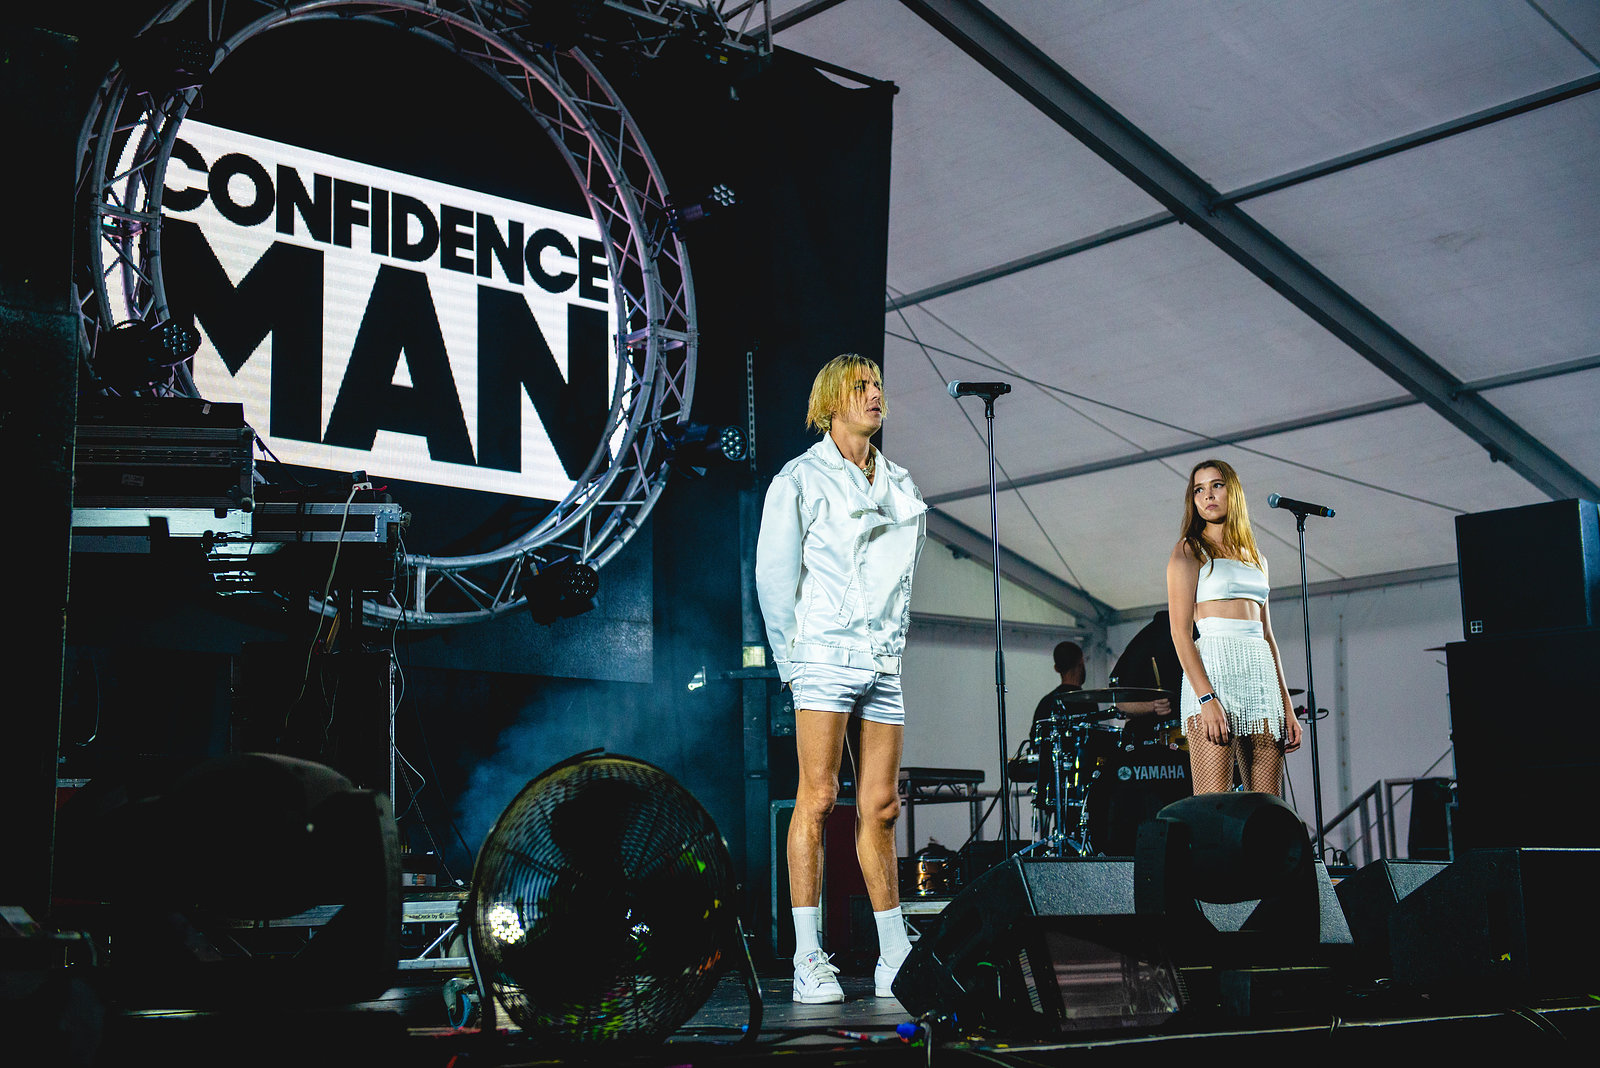 Confidence Man at Standon Calling Festival, July 2018